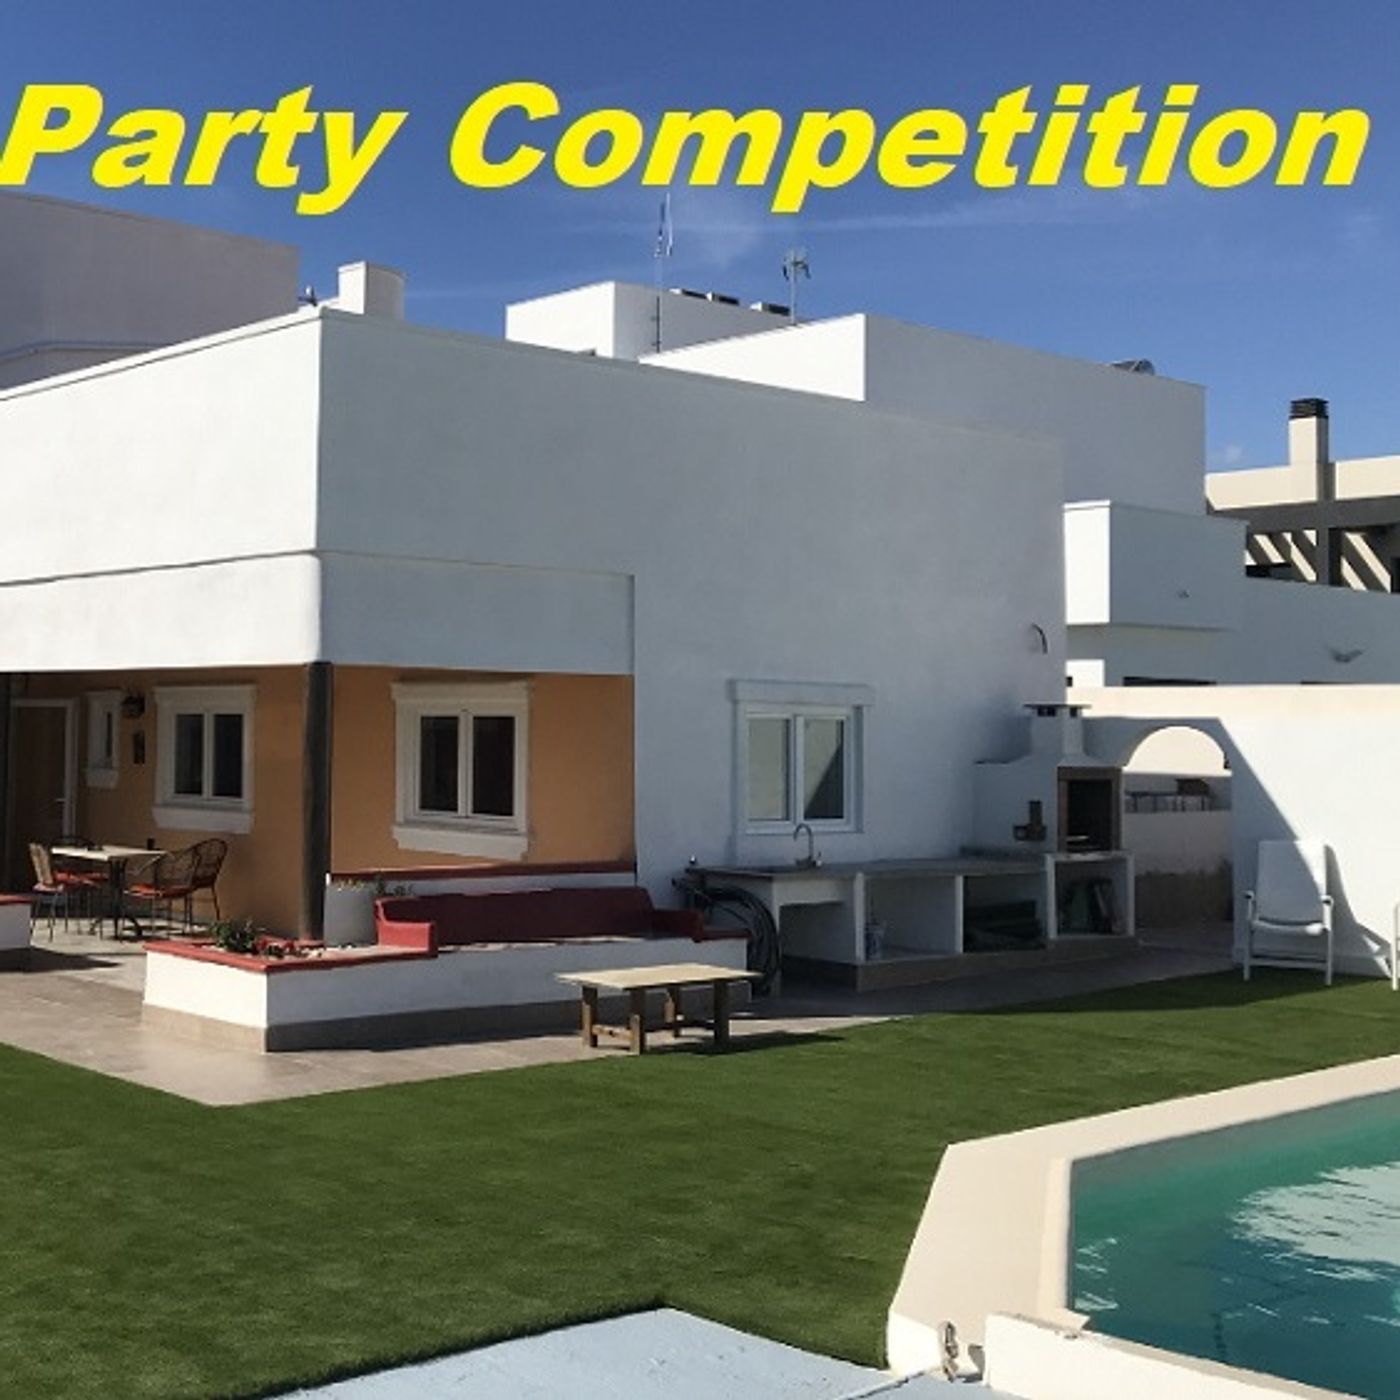 Davids party competition